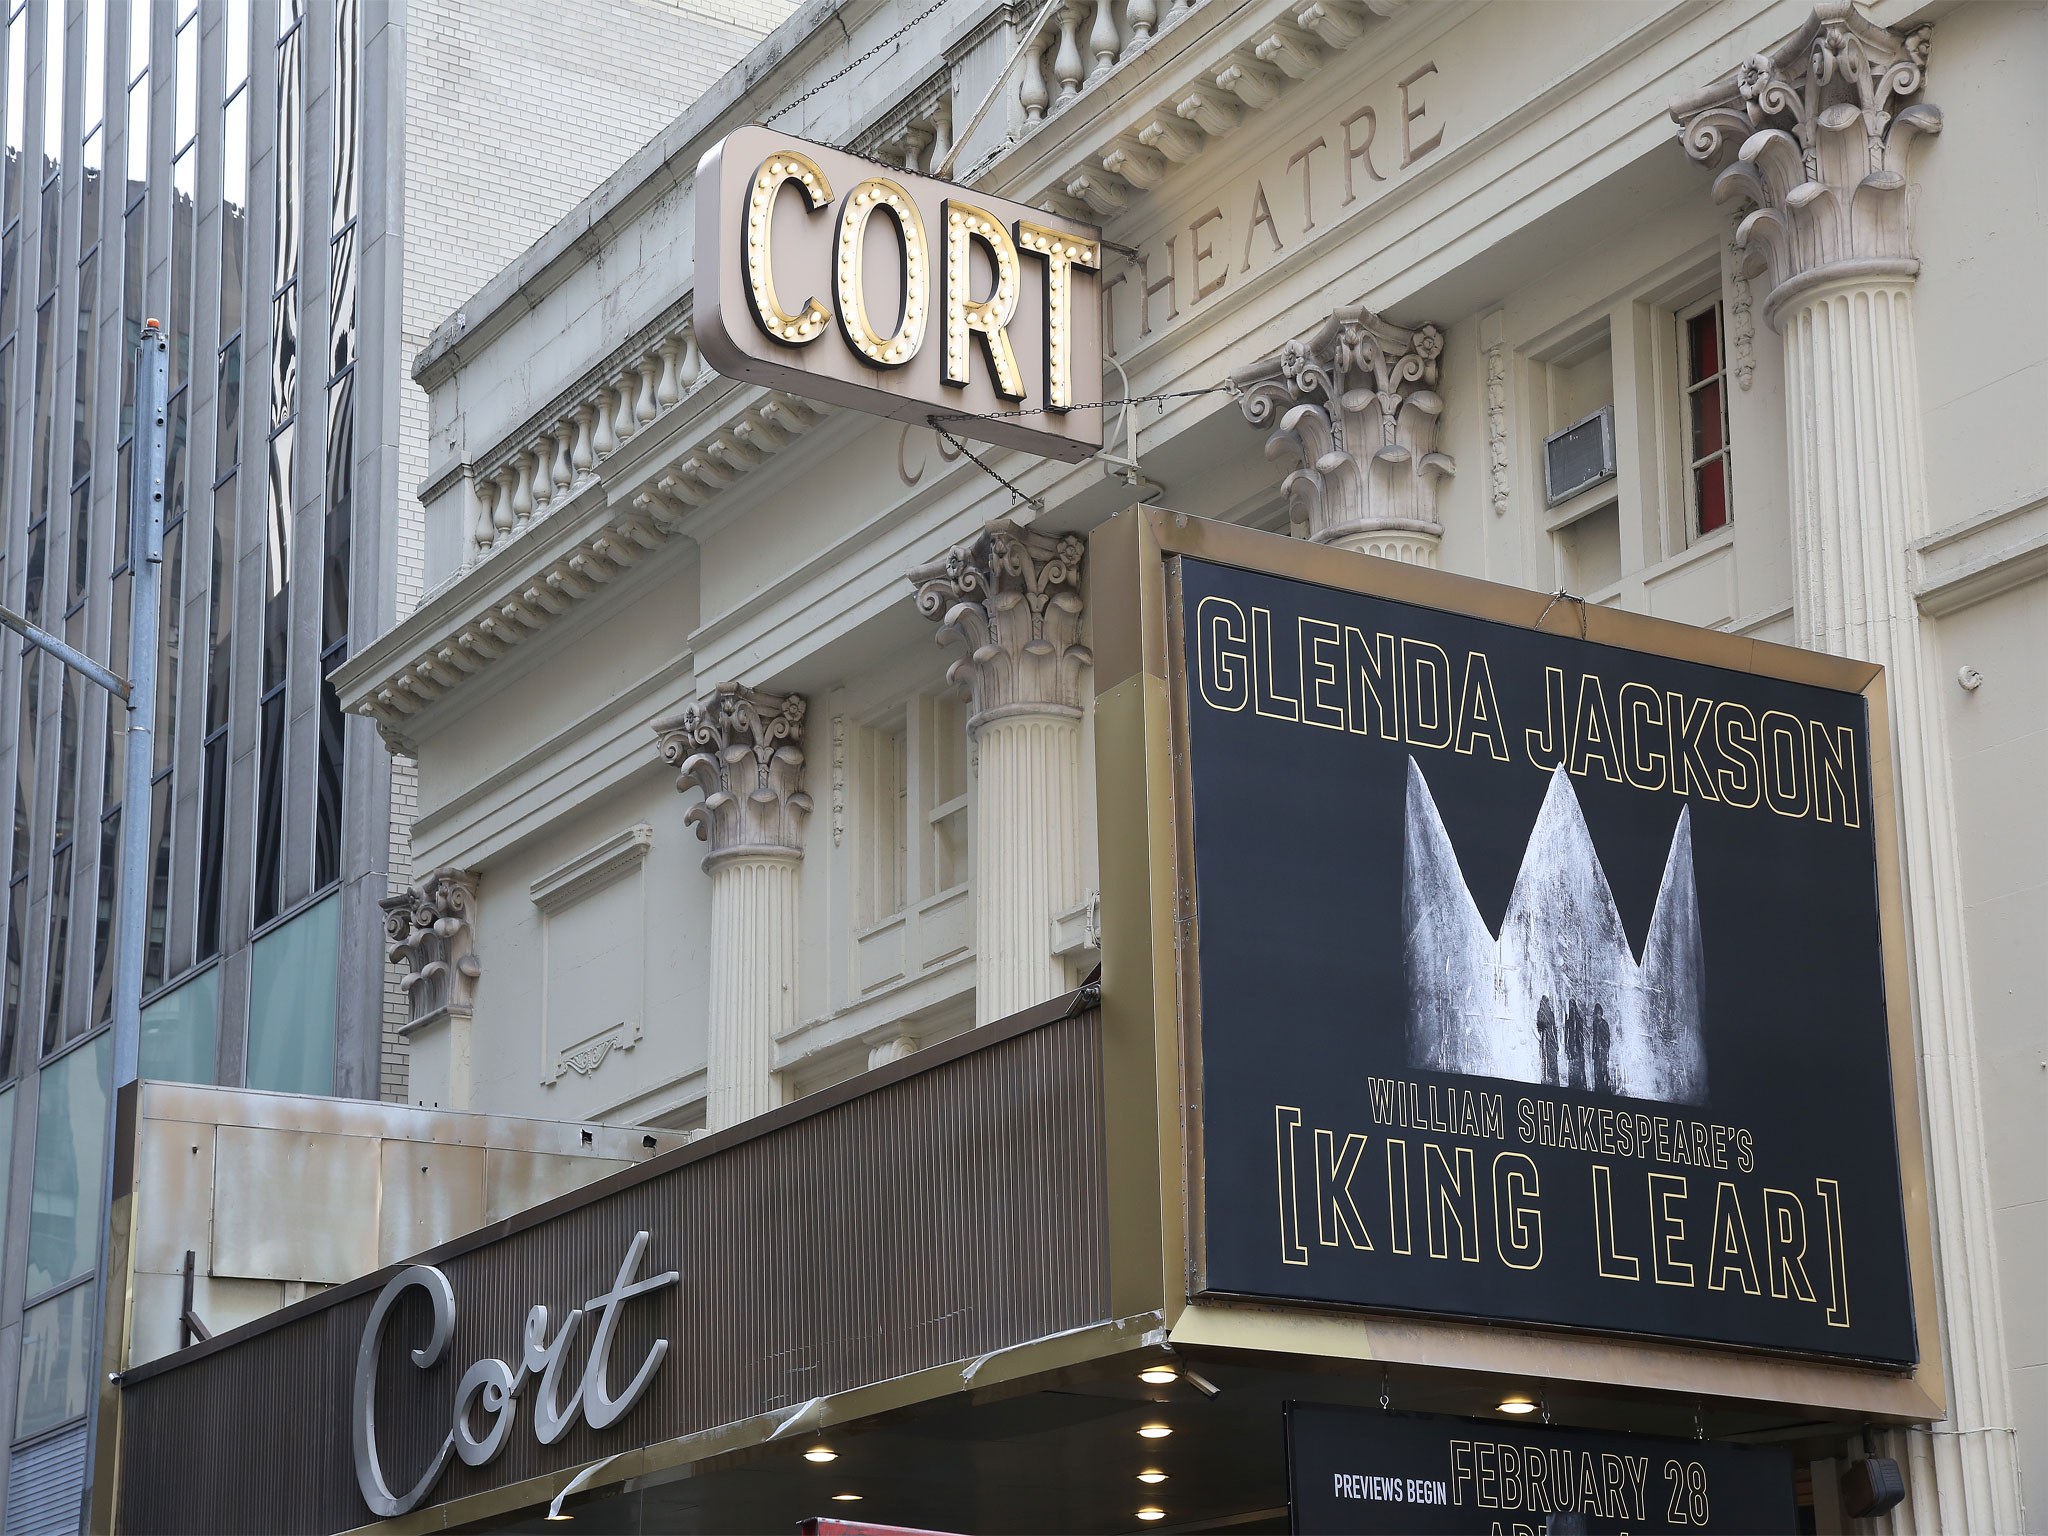 King Lear Cor Theatre Marquee